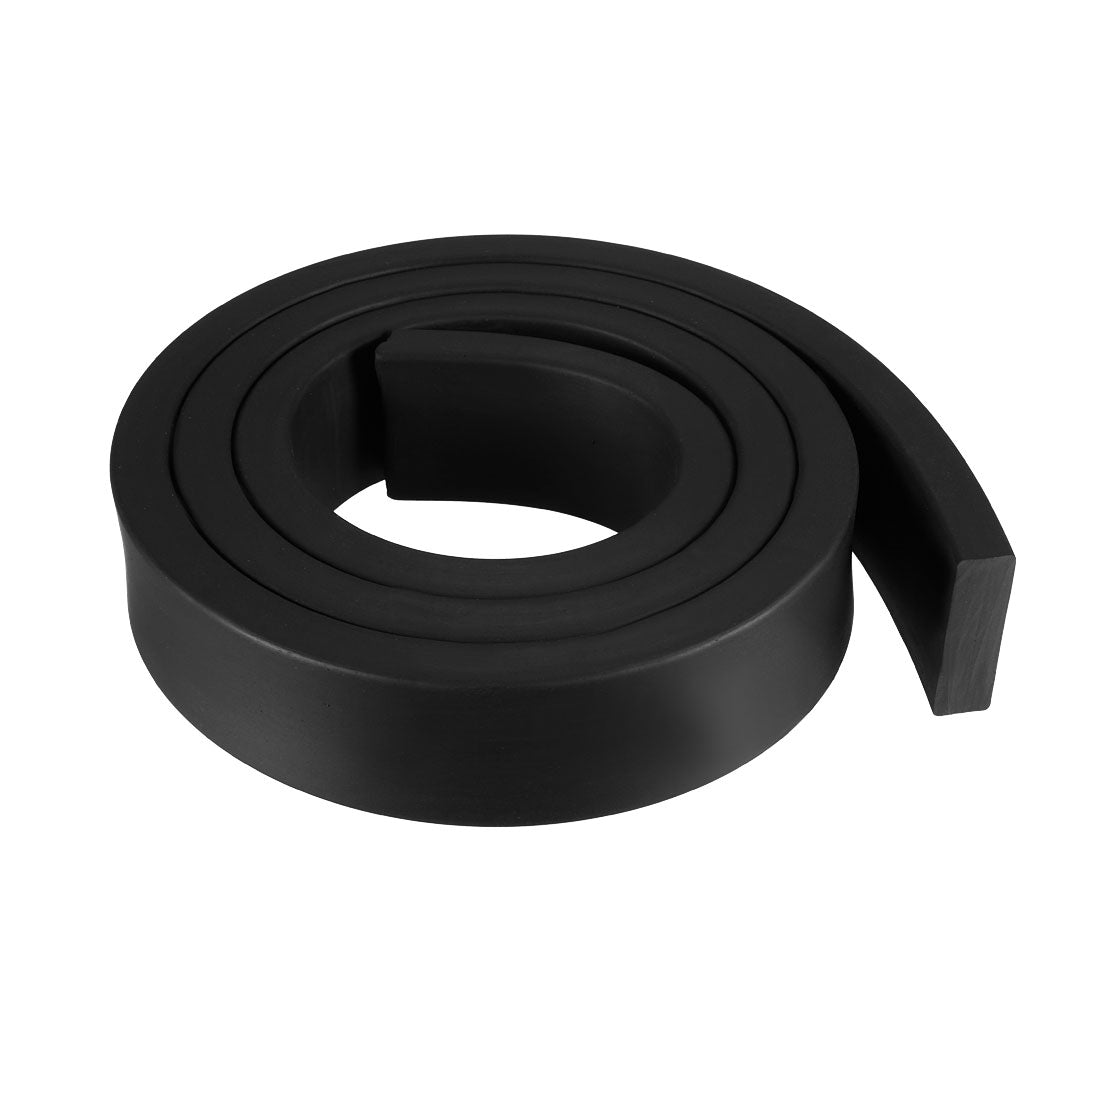 uxcell Uxcell Solid Rectangle Rubber Seal Strip 30mm Wide 10mm Thick, 1 Meter Long Black